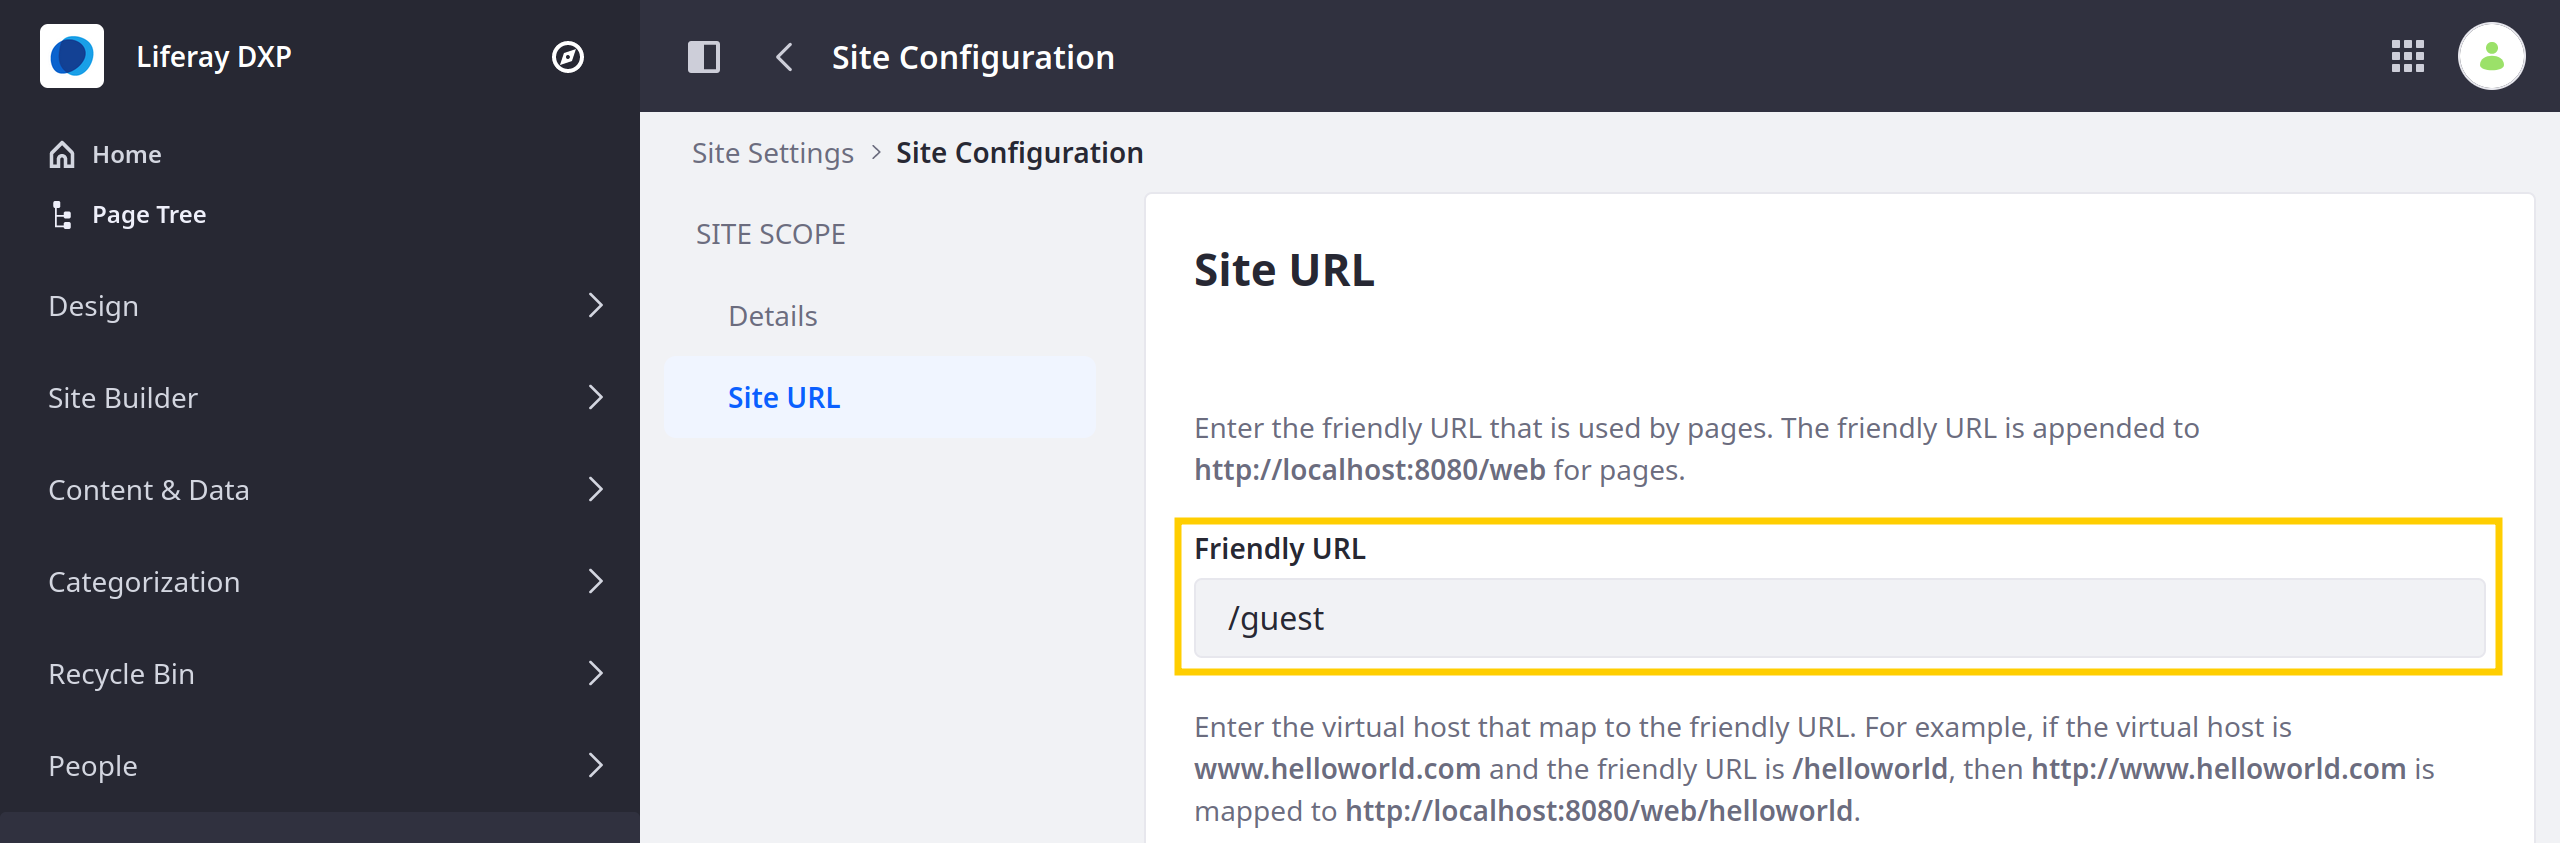 You can configure a friendly URL for your Site.